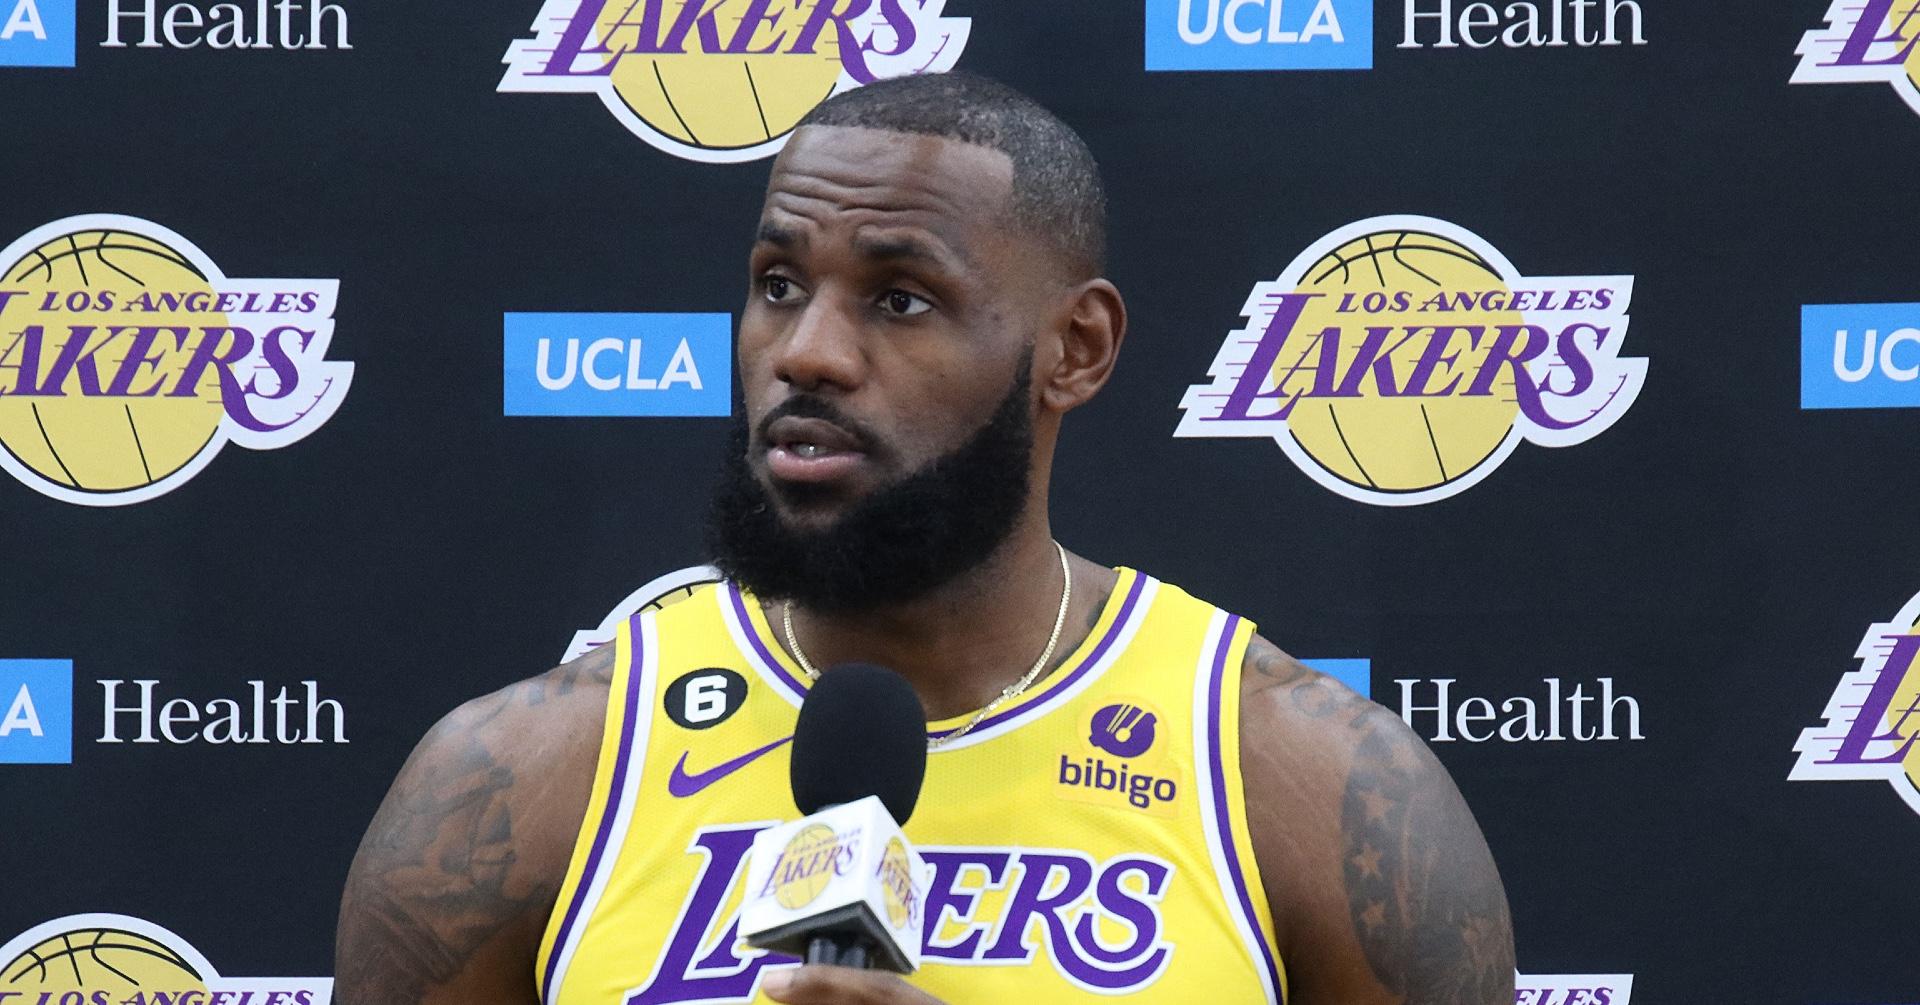 Lakers land $100-million jersey patch deal with Bibigo - Los